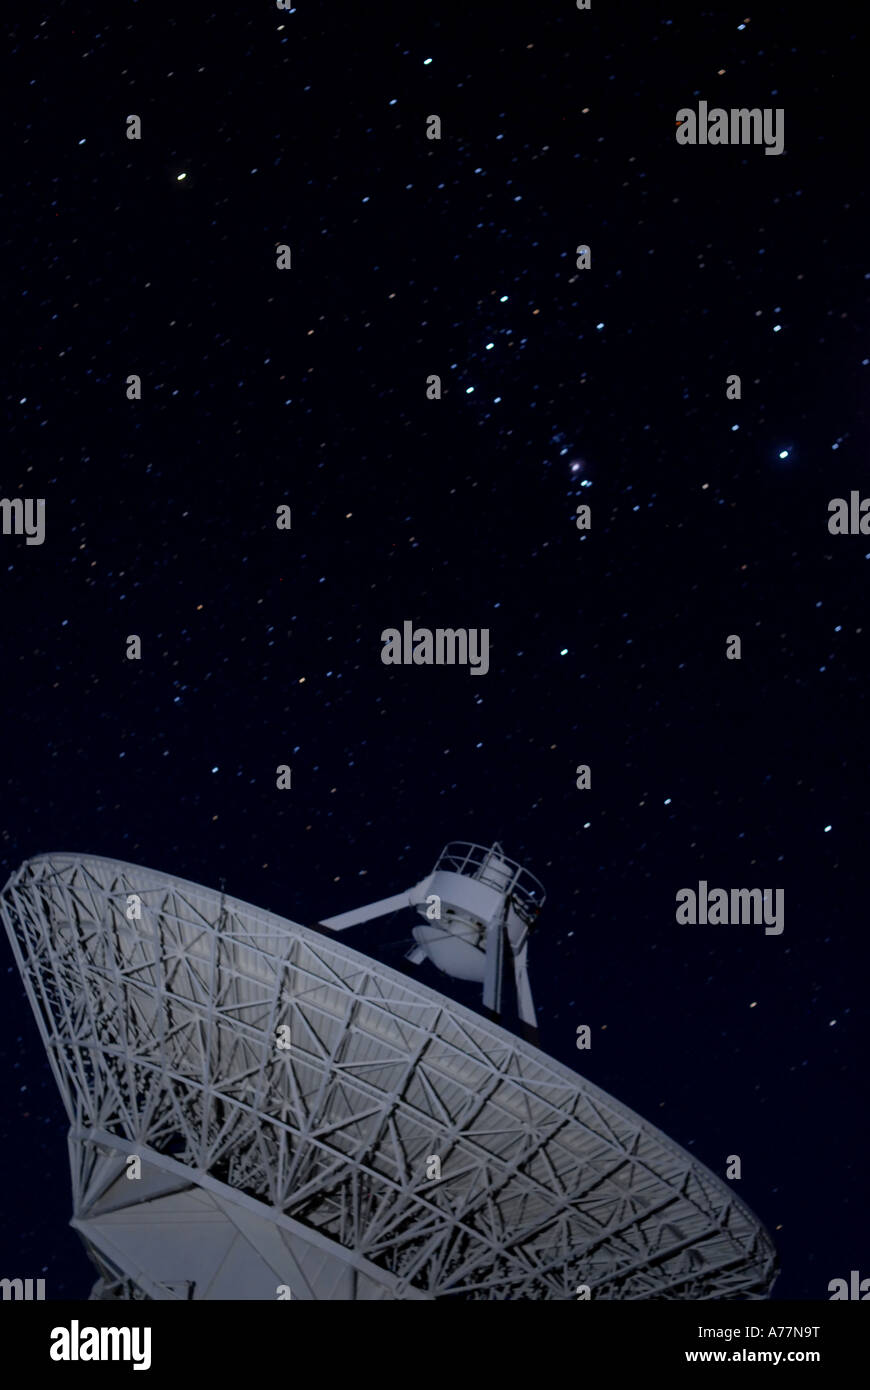 Owens Valley Radio antenna Array looking at Orion constellation Stock Photo